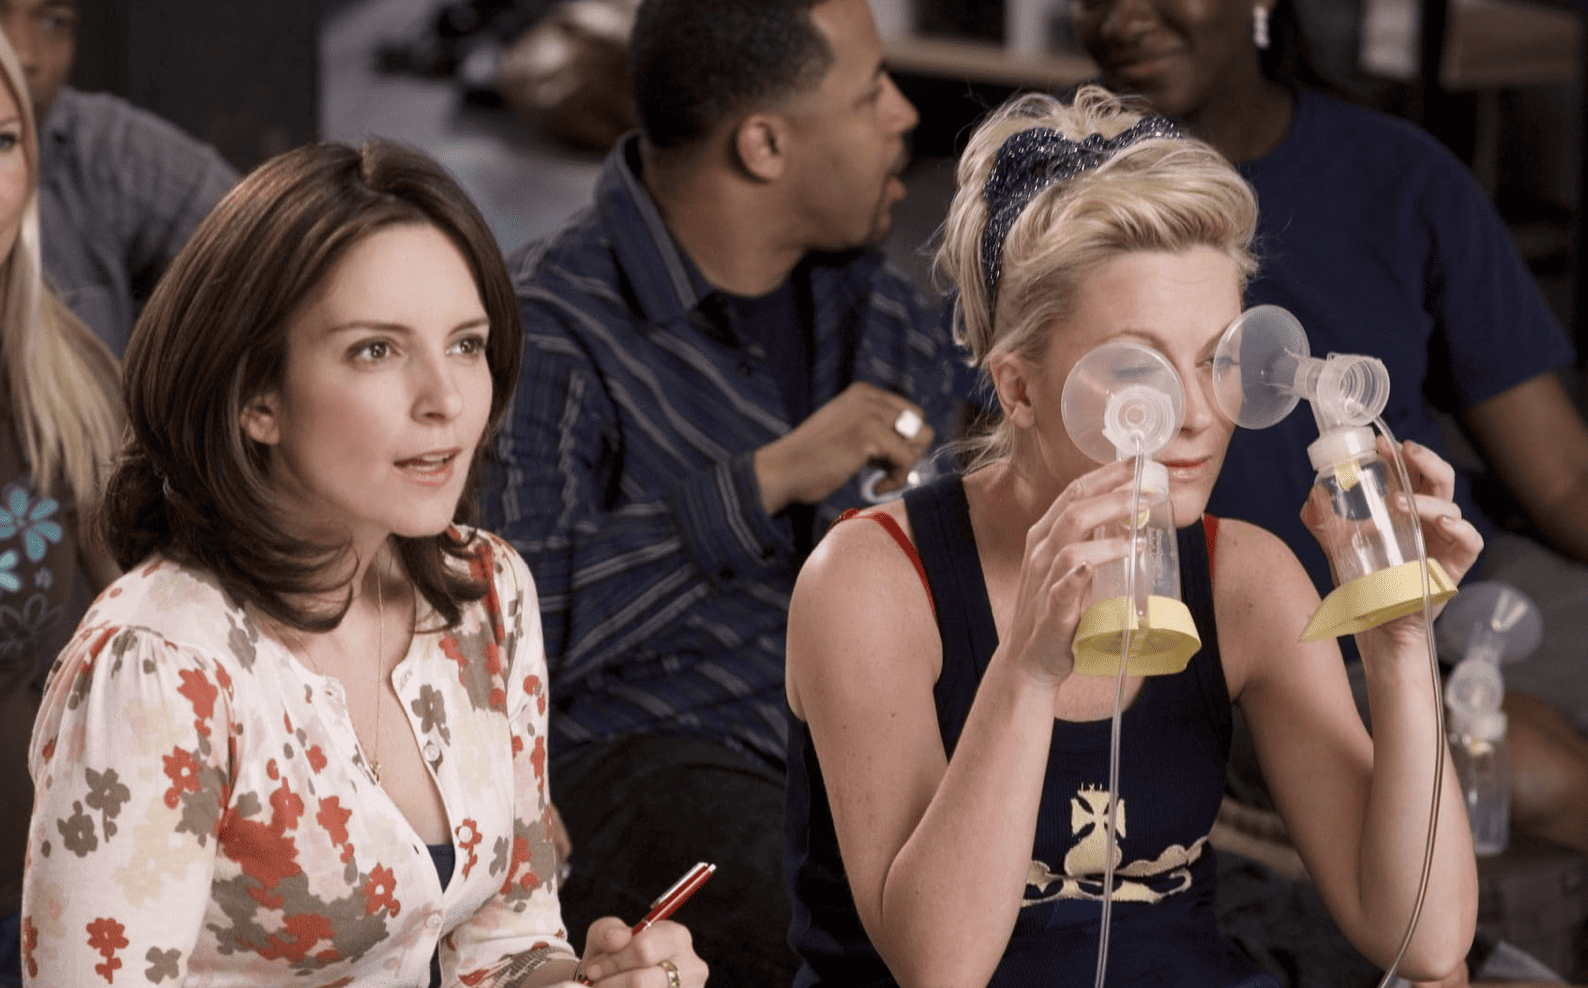 Tiny Fey intently listening to someone out of shot talk while Amy Poehler kneels next to her holding a set of suction cups to her eyes in this image from Broadway Video.